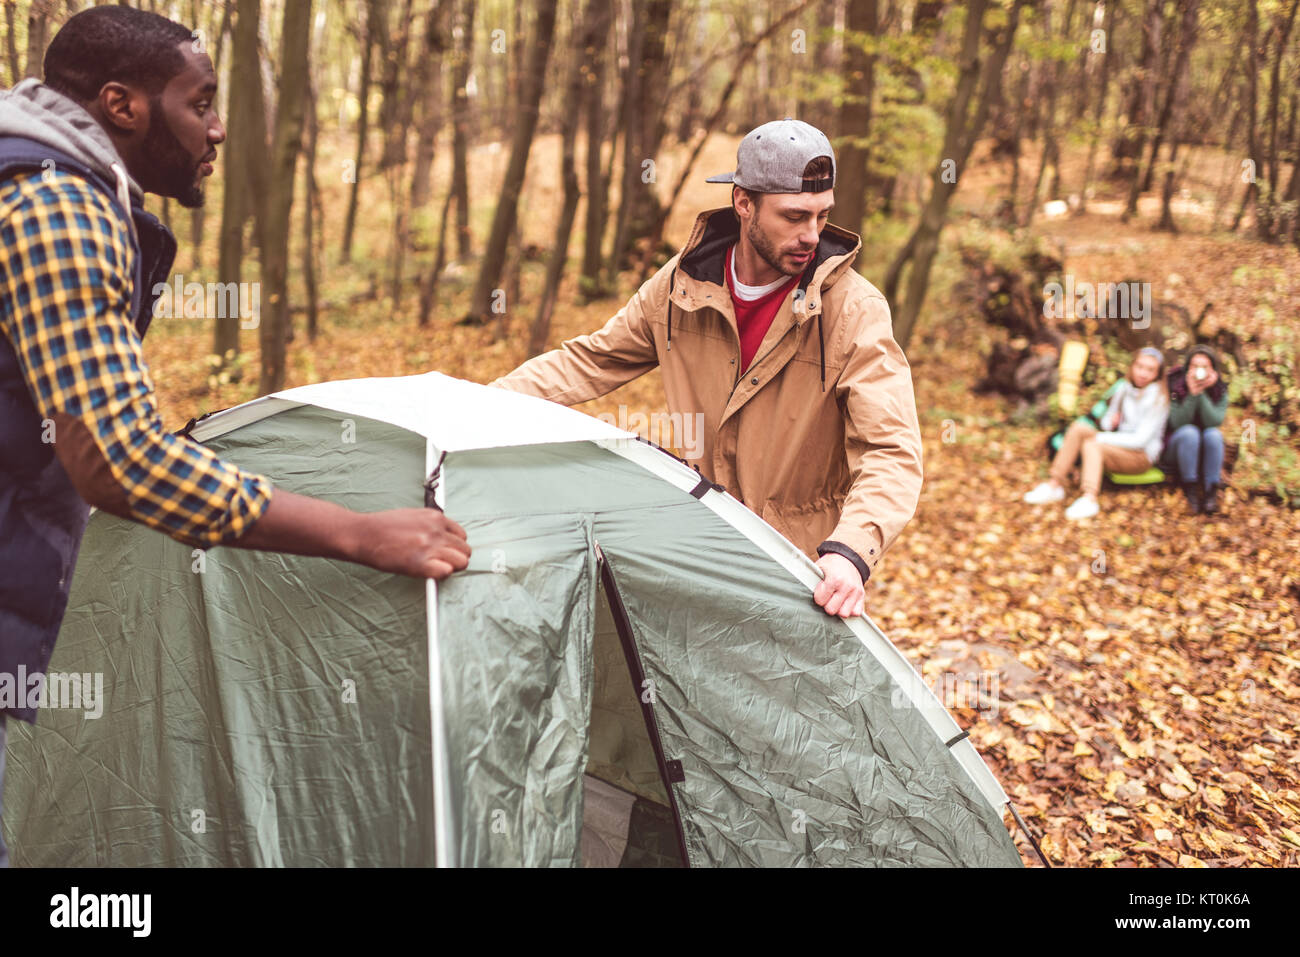 Men pitching tent in autumn forest Stock Photo